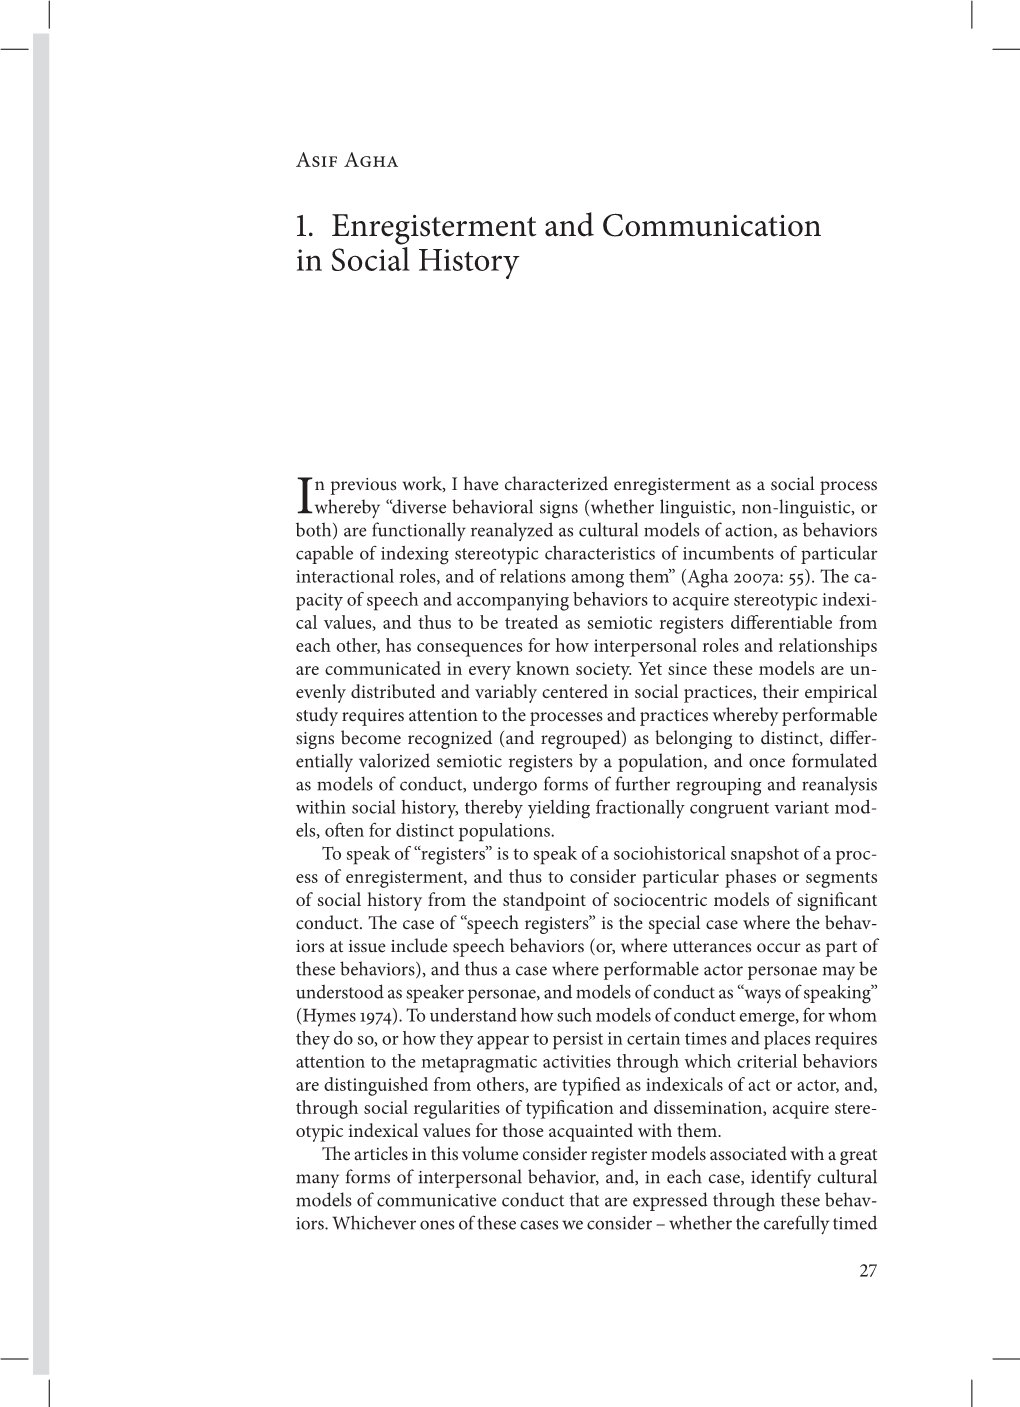 1. Enregisterment and Communication in Social History